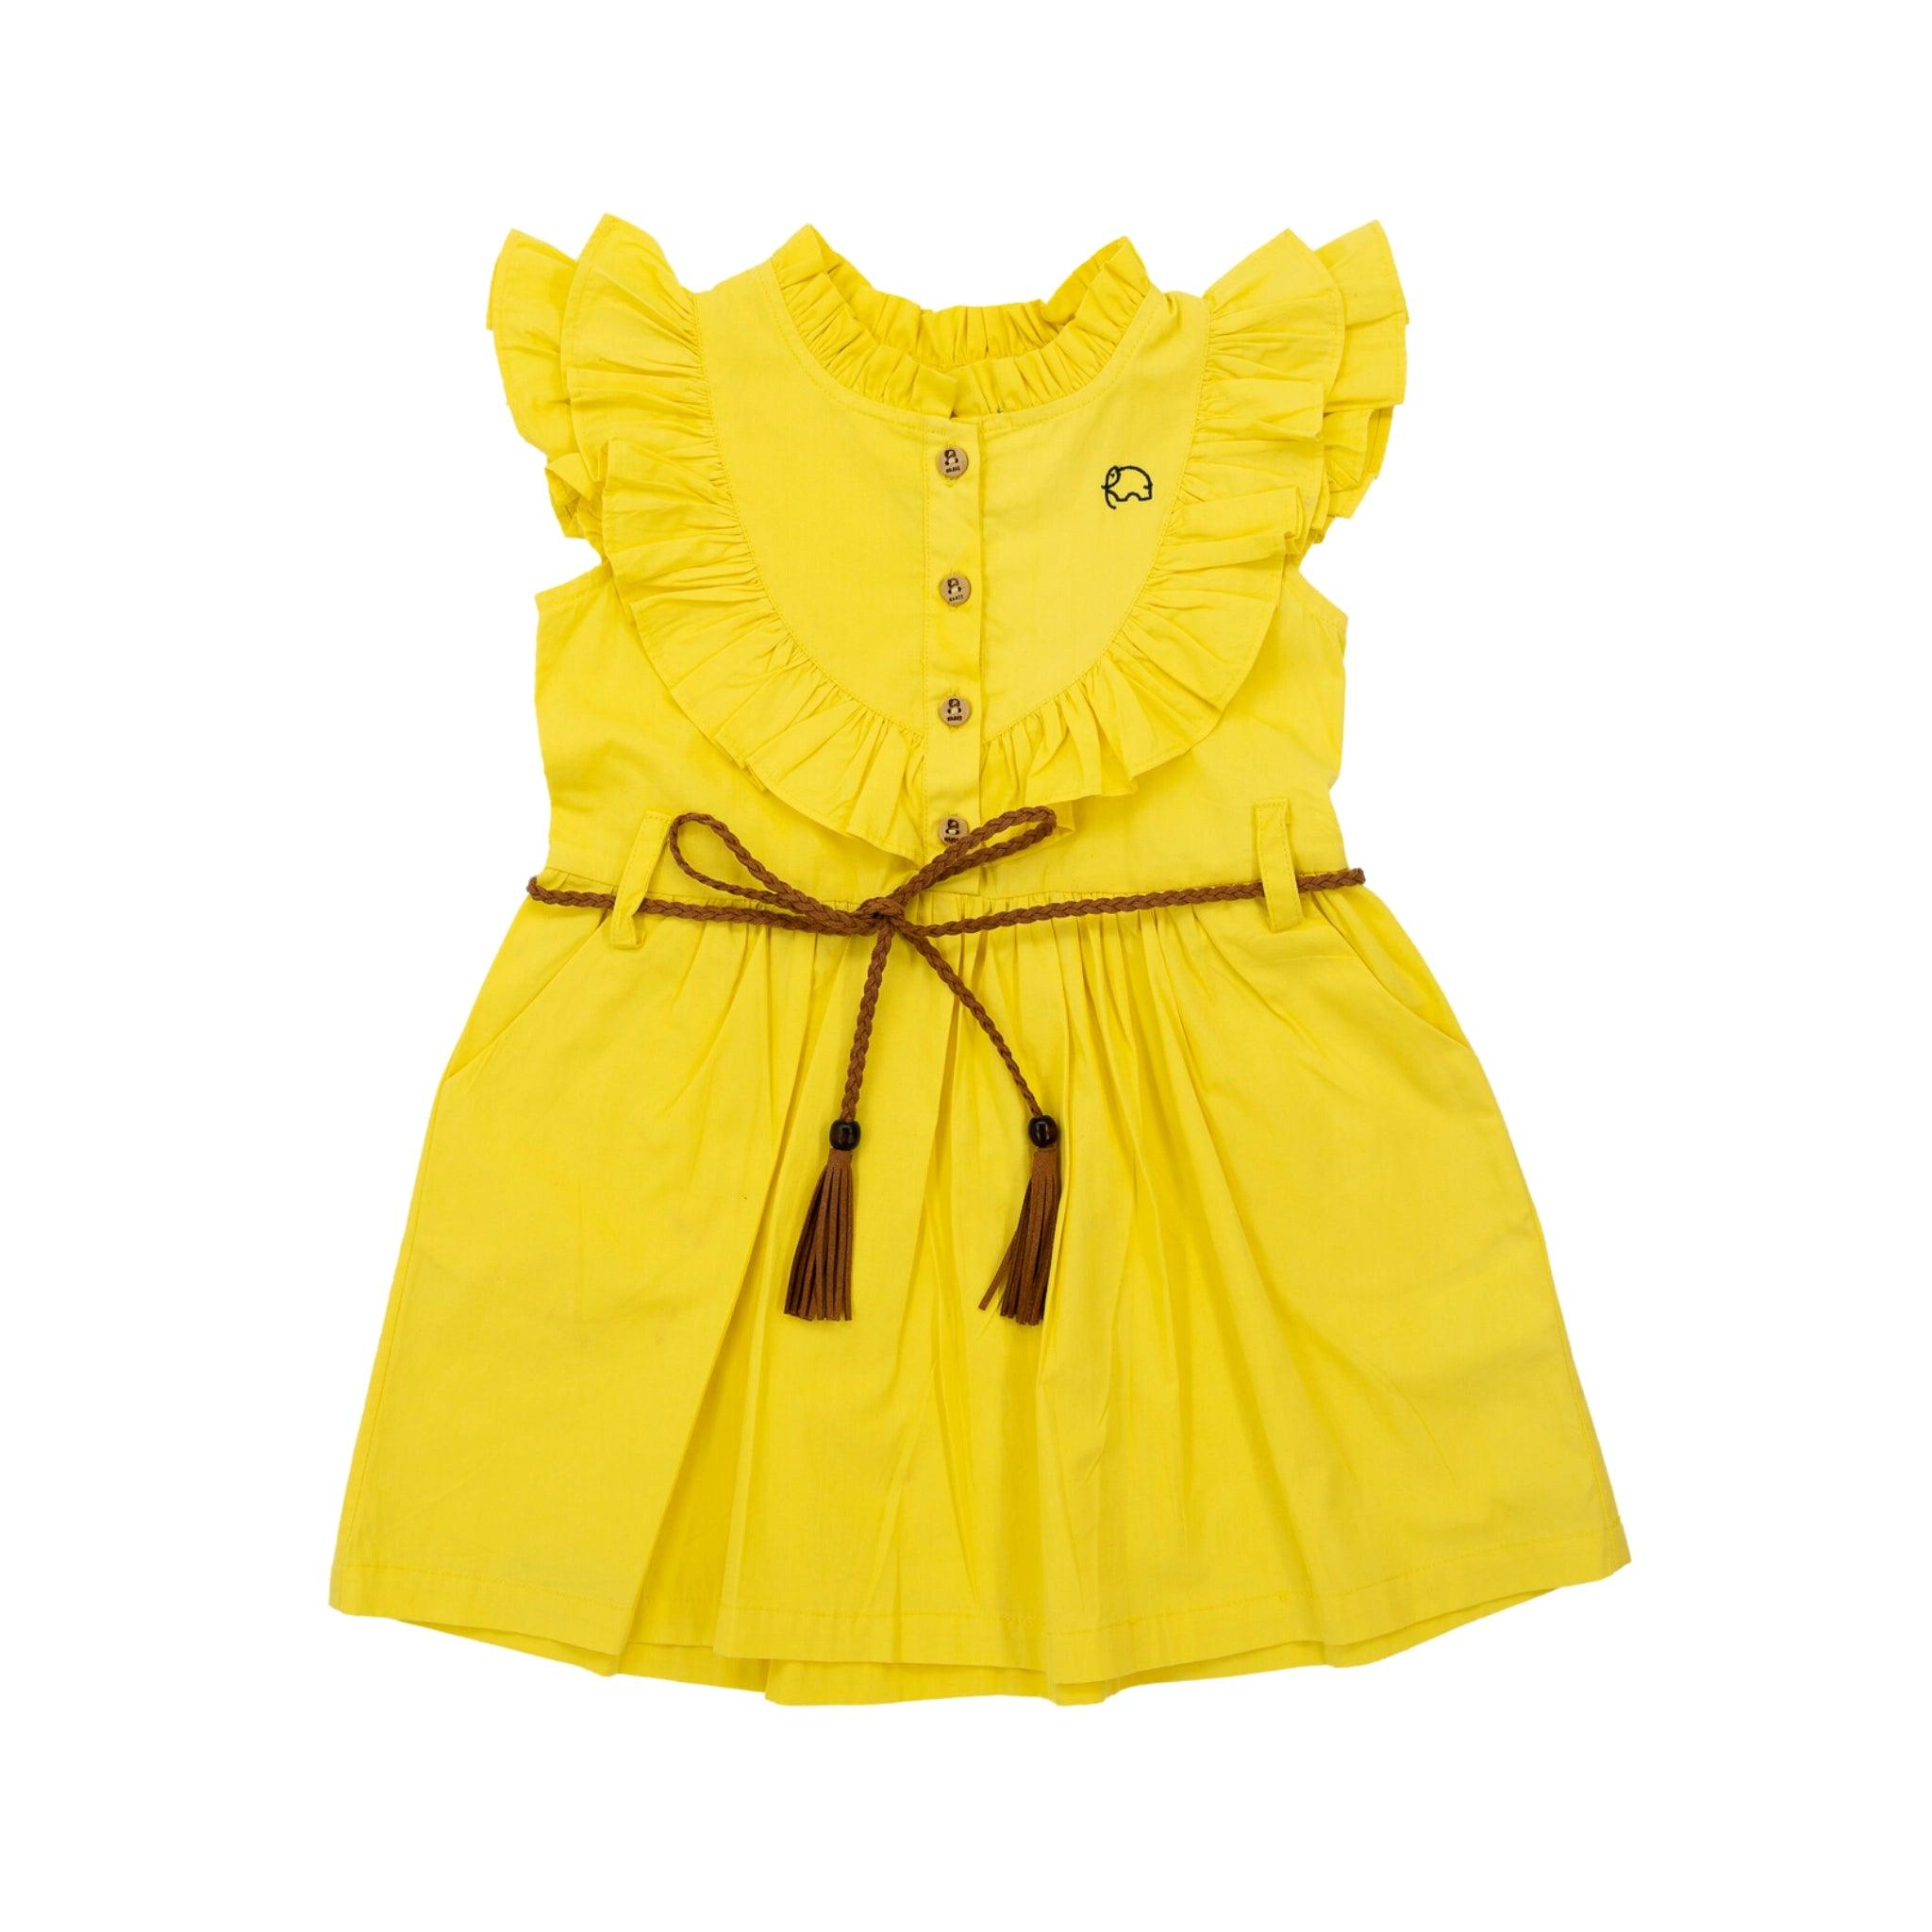 Yellow Butterfly Sleeve Cotton Dress For Girls by Karee, with button-up front and a tasseled tie waist, isolated on a white background.